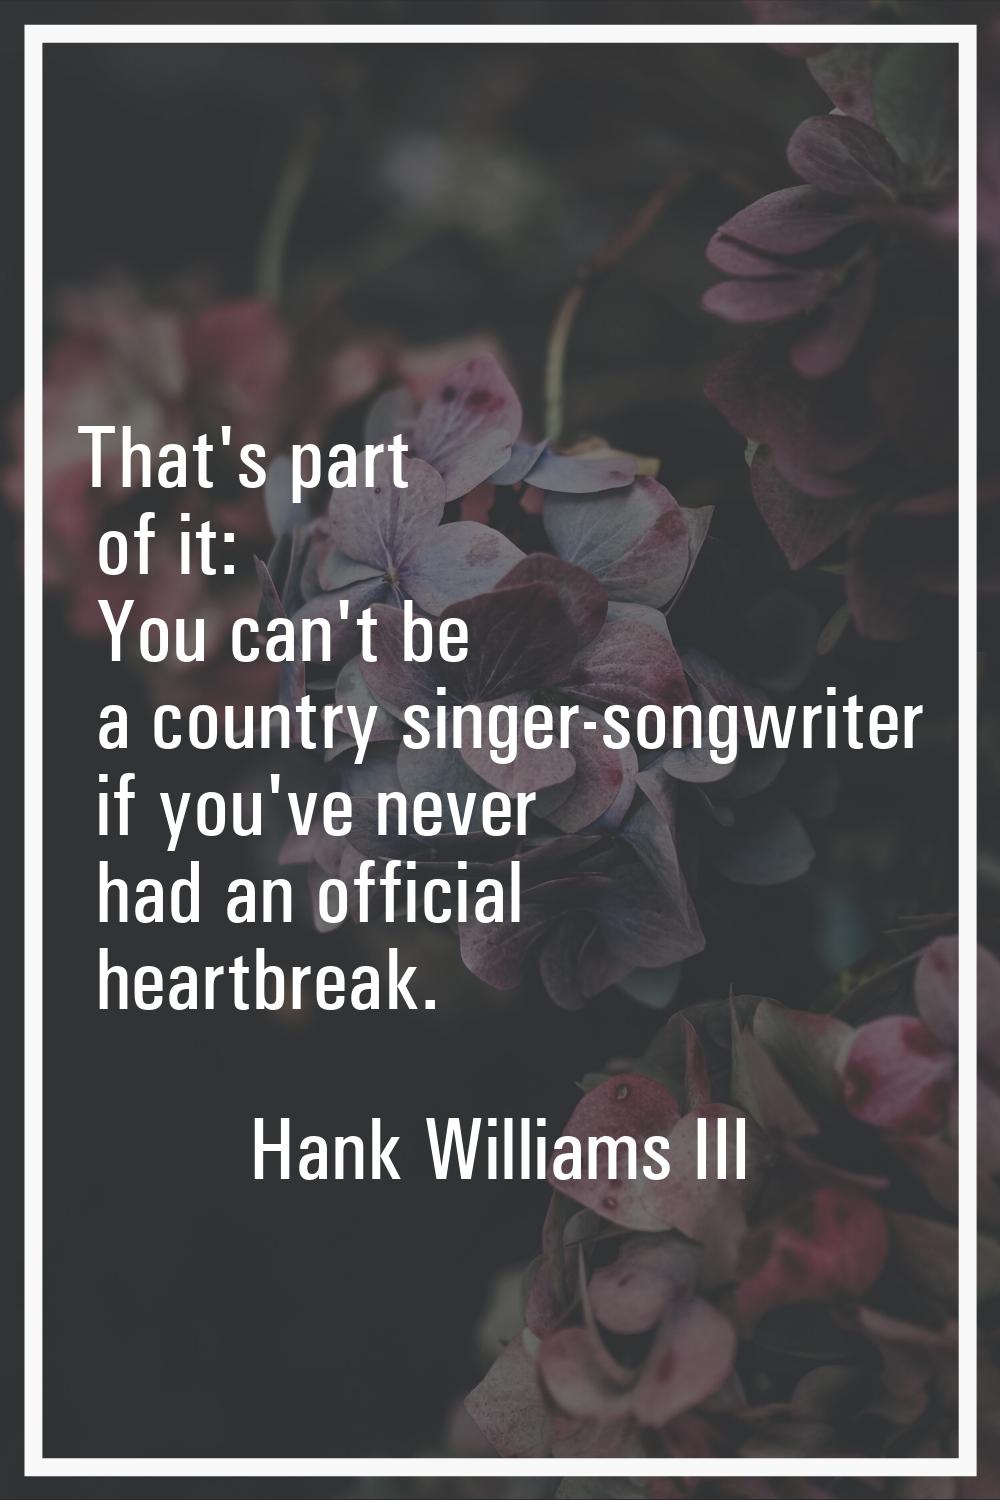 That's part of it: You can't be a country singer-songwriter if you've never had an official heartbr